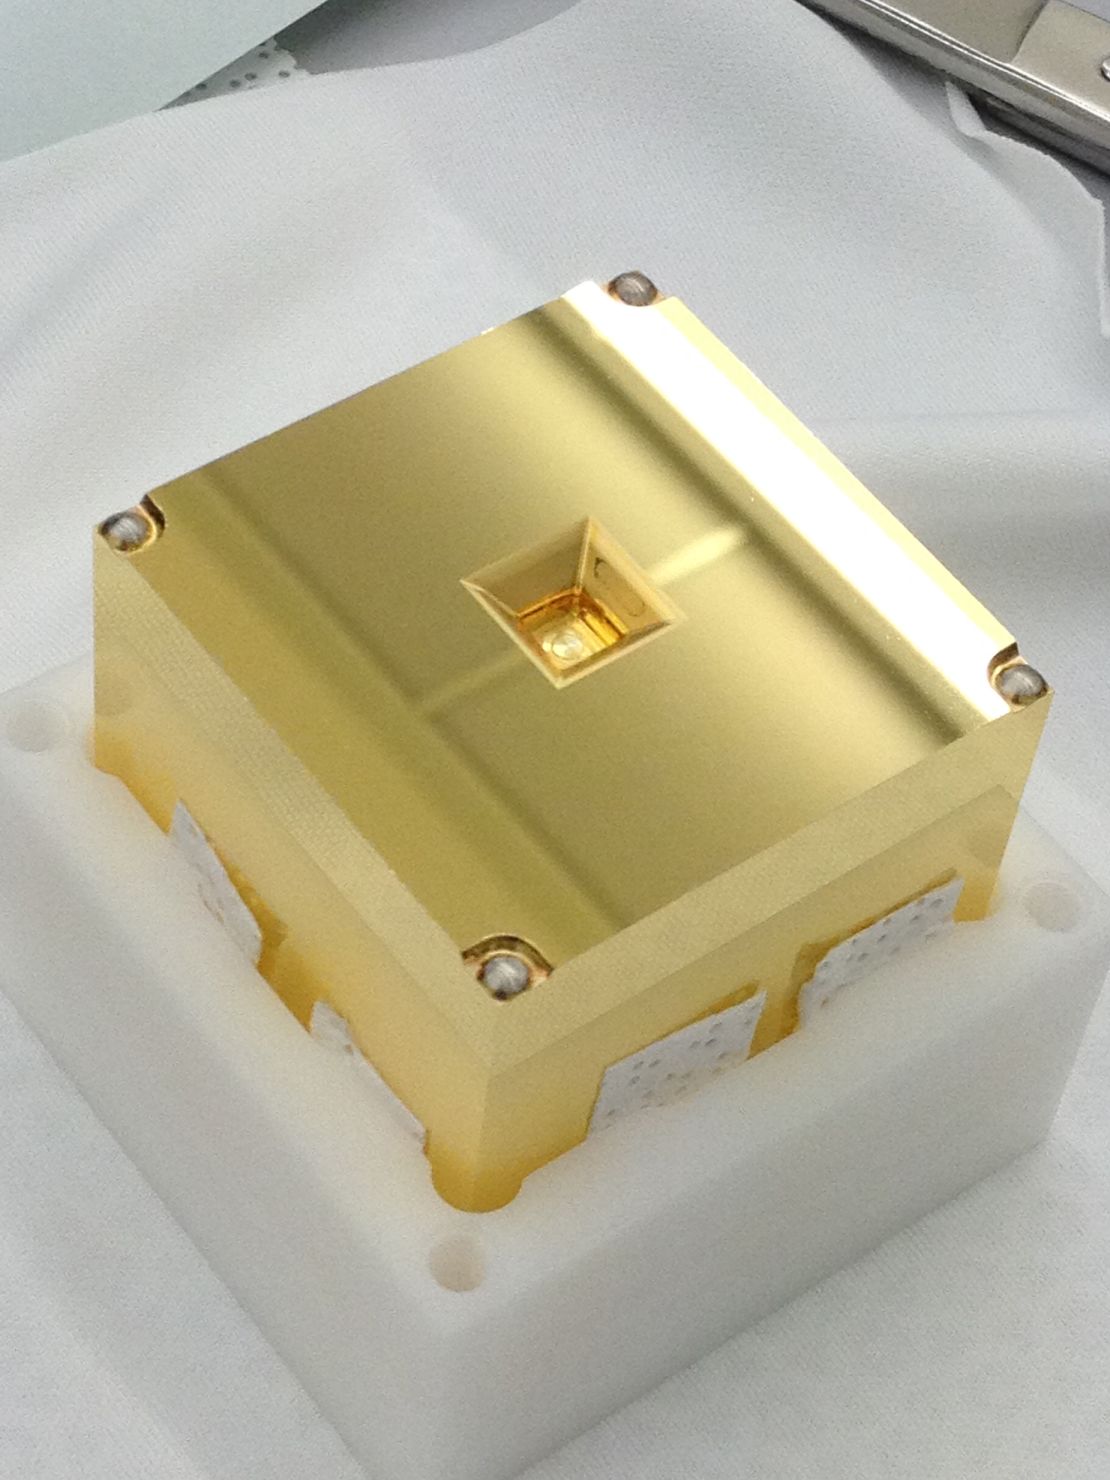 The golden cubes inside each spacecraft will help the LISA mission detect gravitational waves.